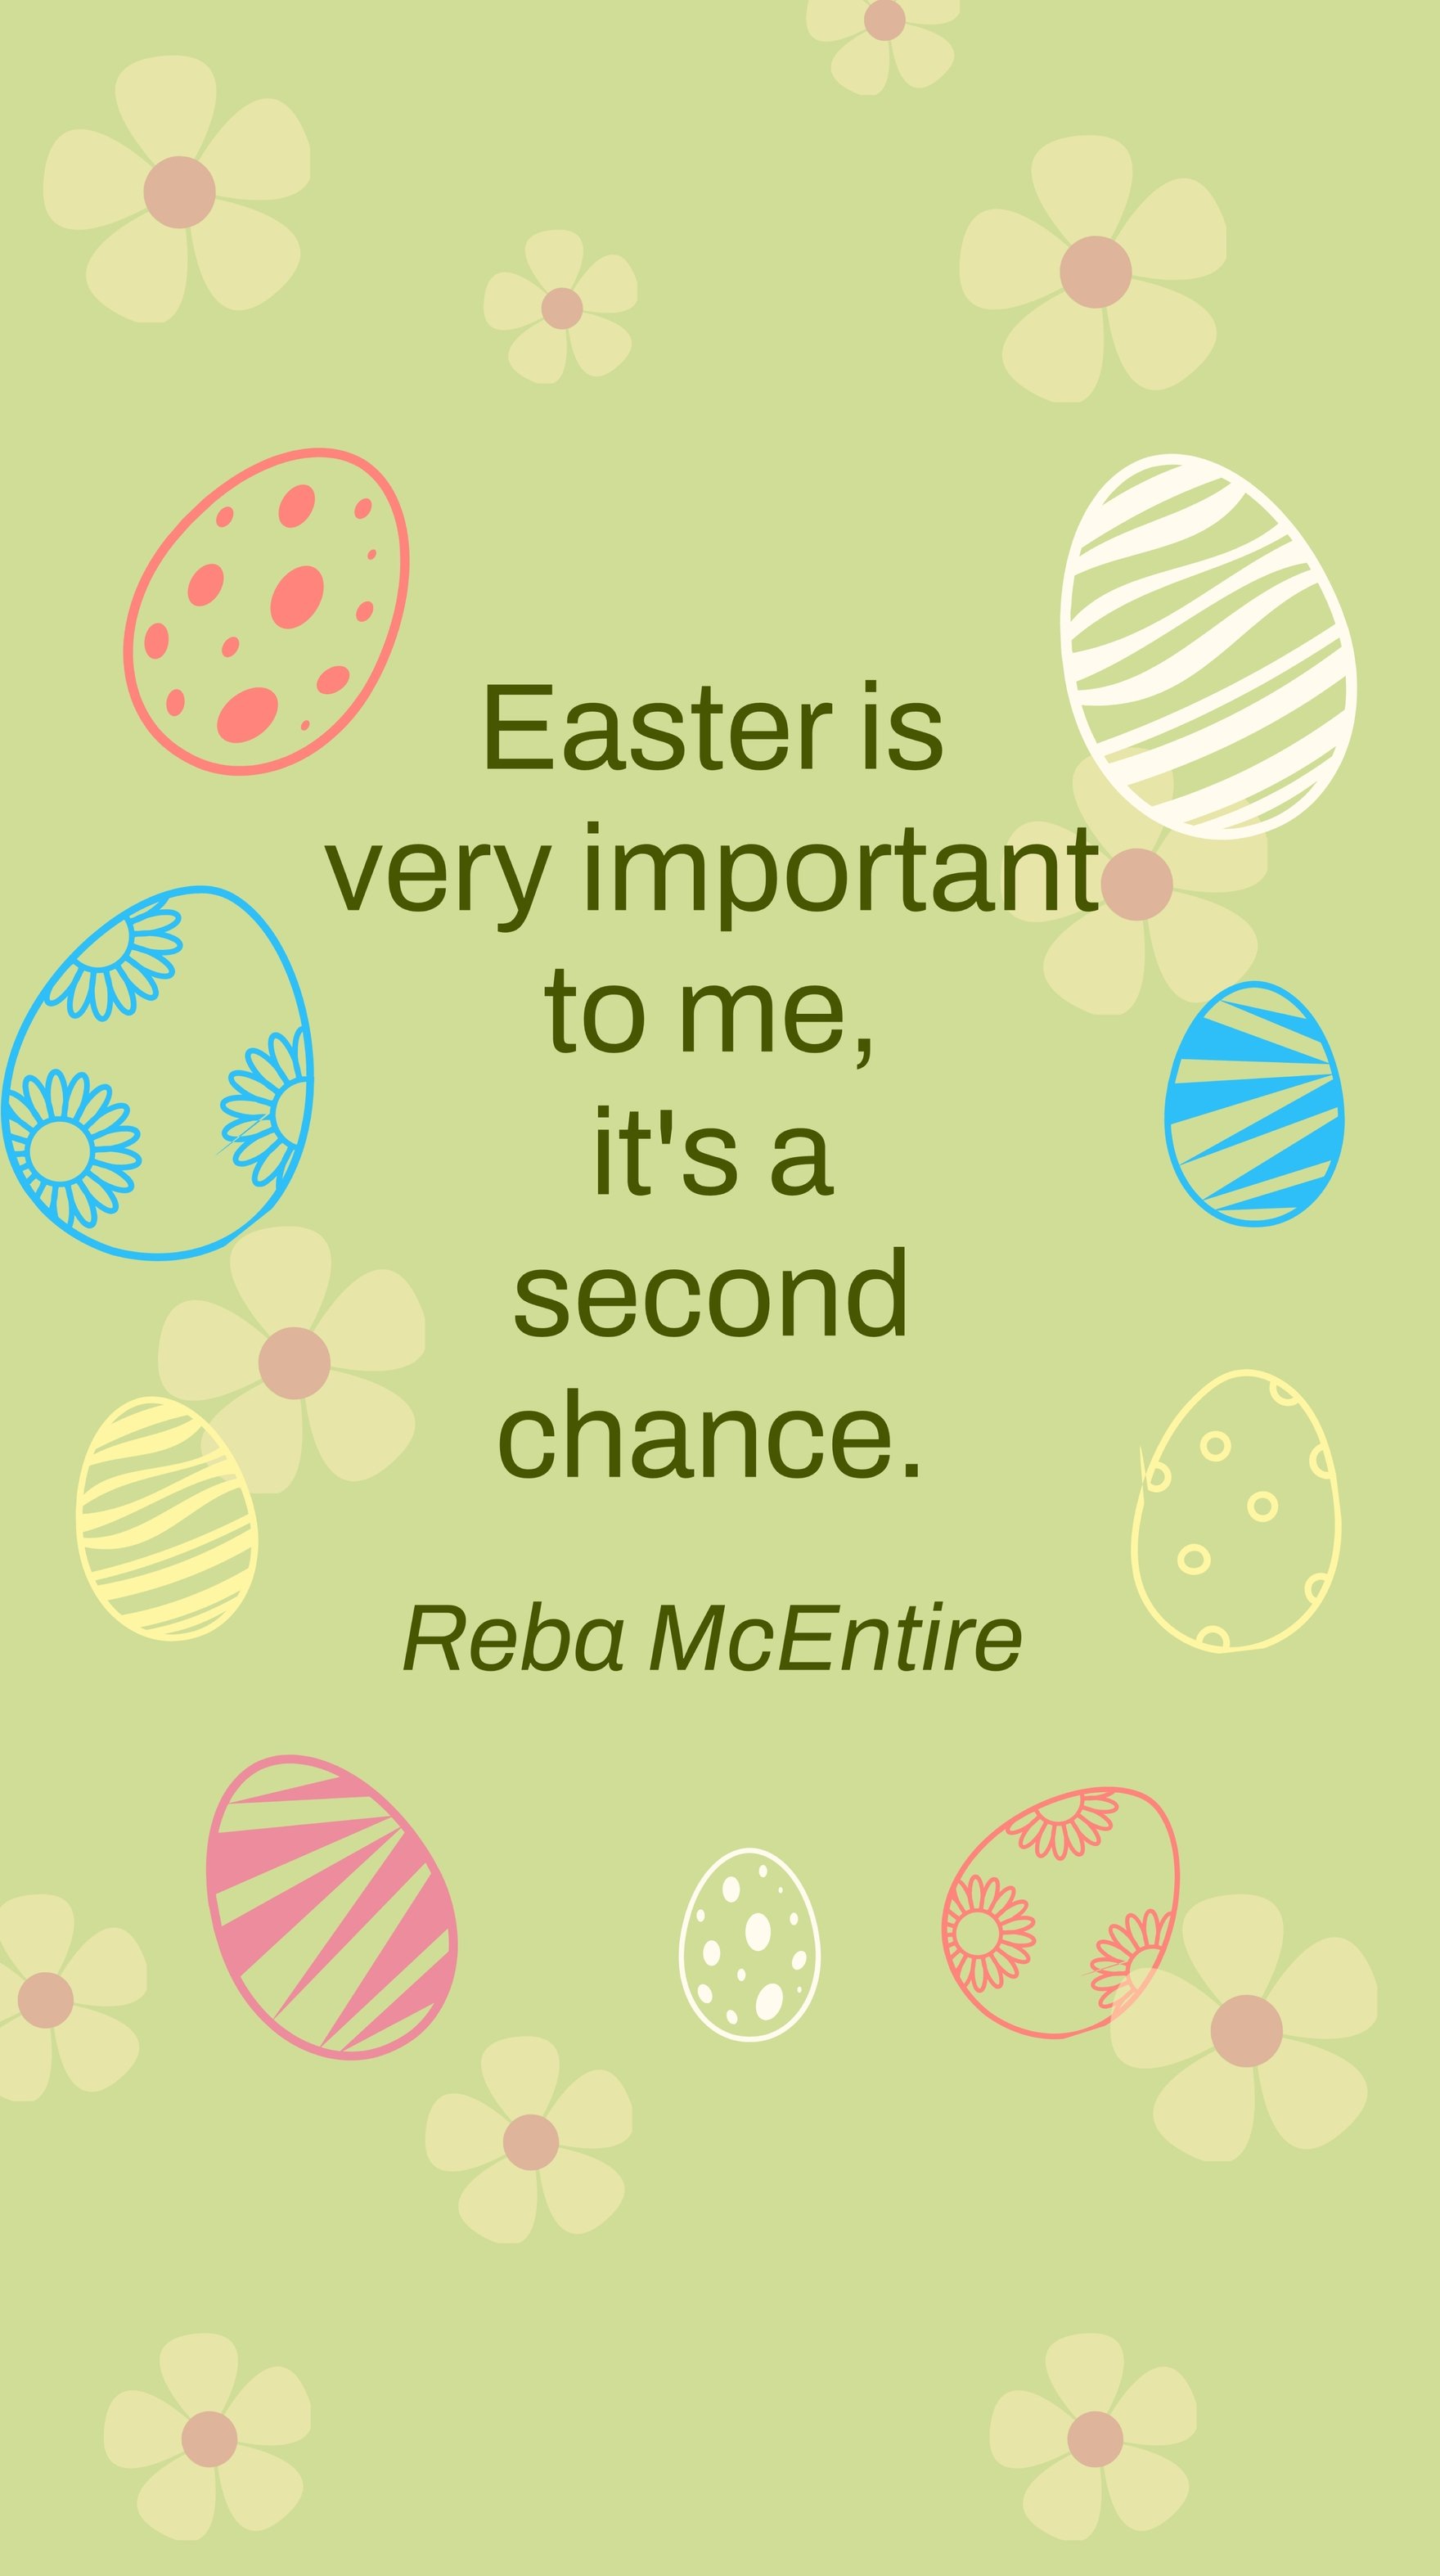 Free Reba McEntire - Easter is very important to me, it's a second chance. in JPG